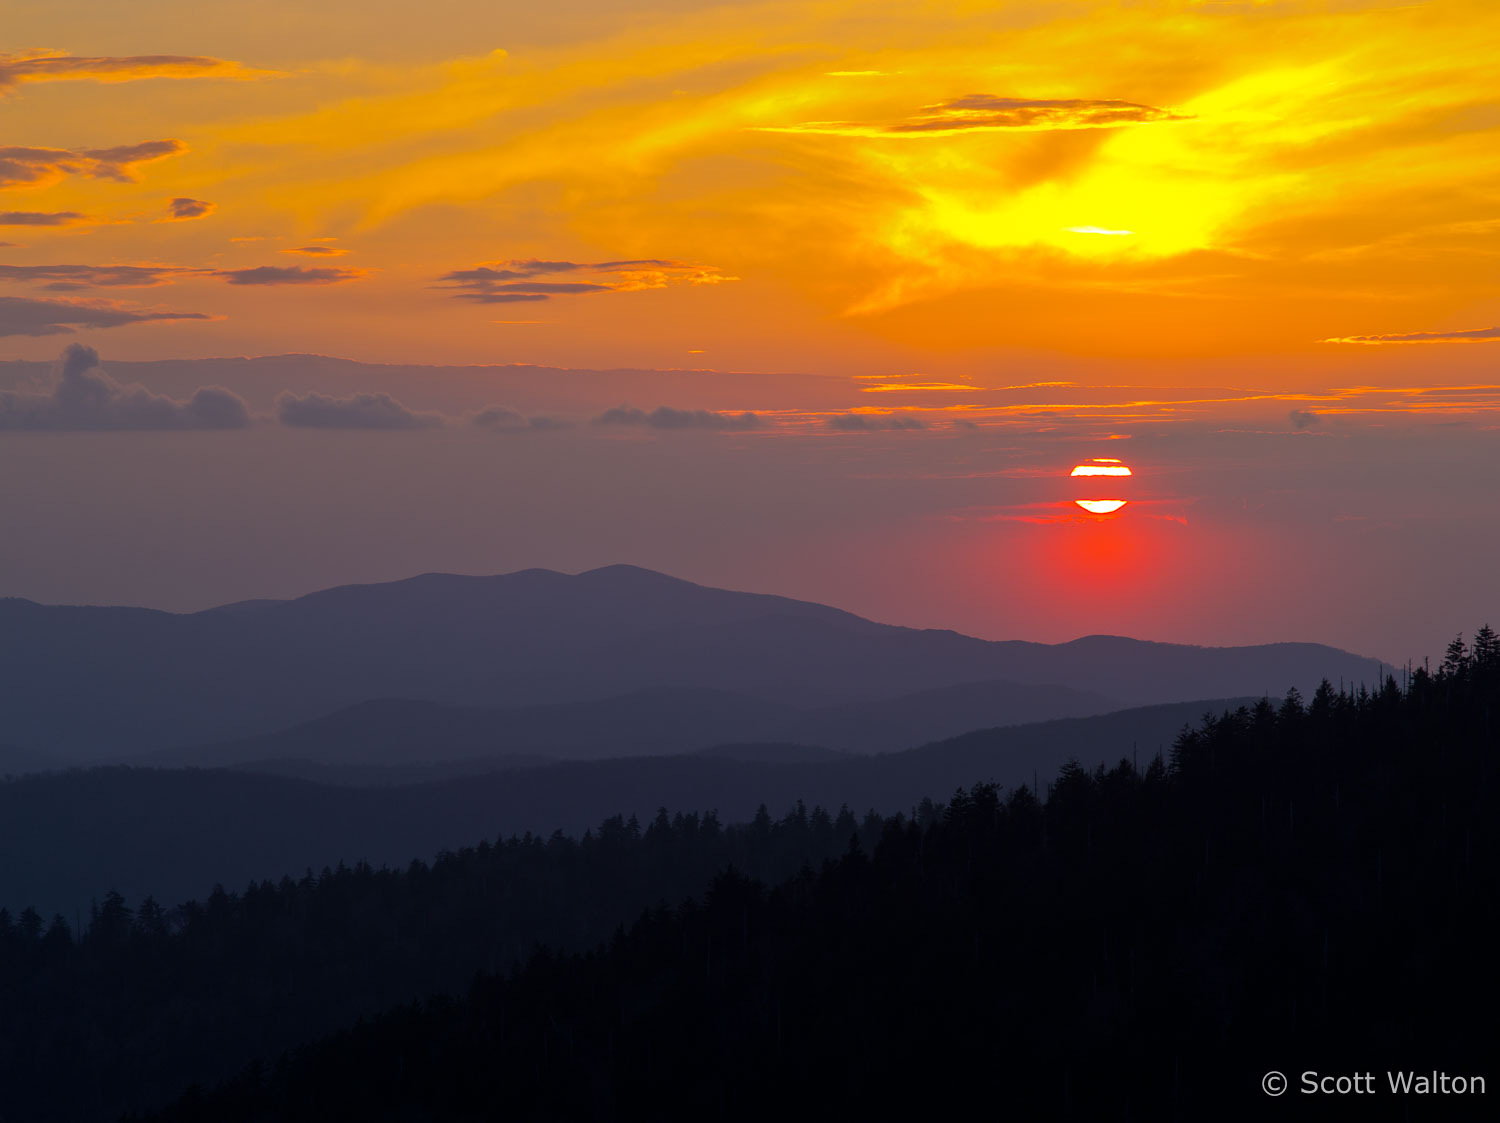 sunset-clingmans-dome-2-great-smoky-mountains-national-park-tennessee.jpg